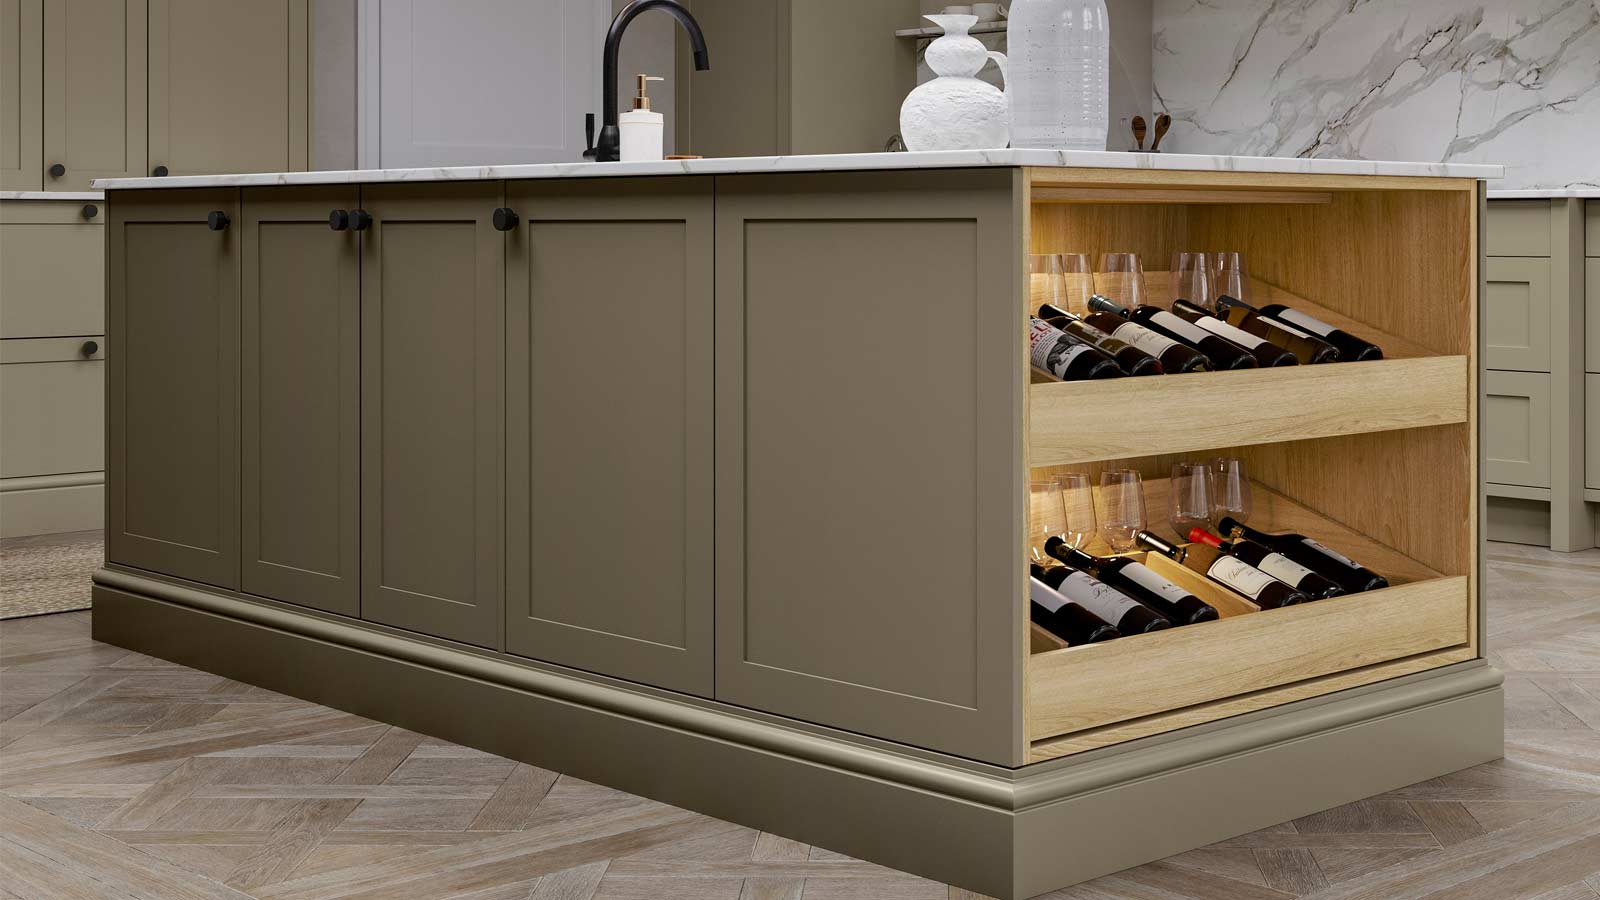 A kitchen island with a shelf for wine bottles